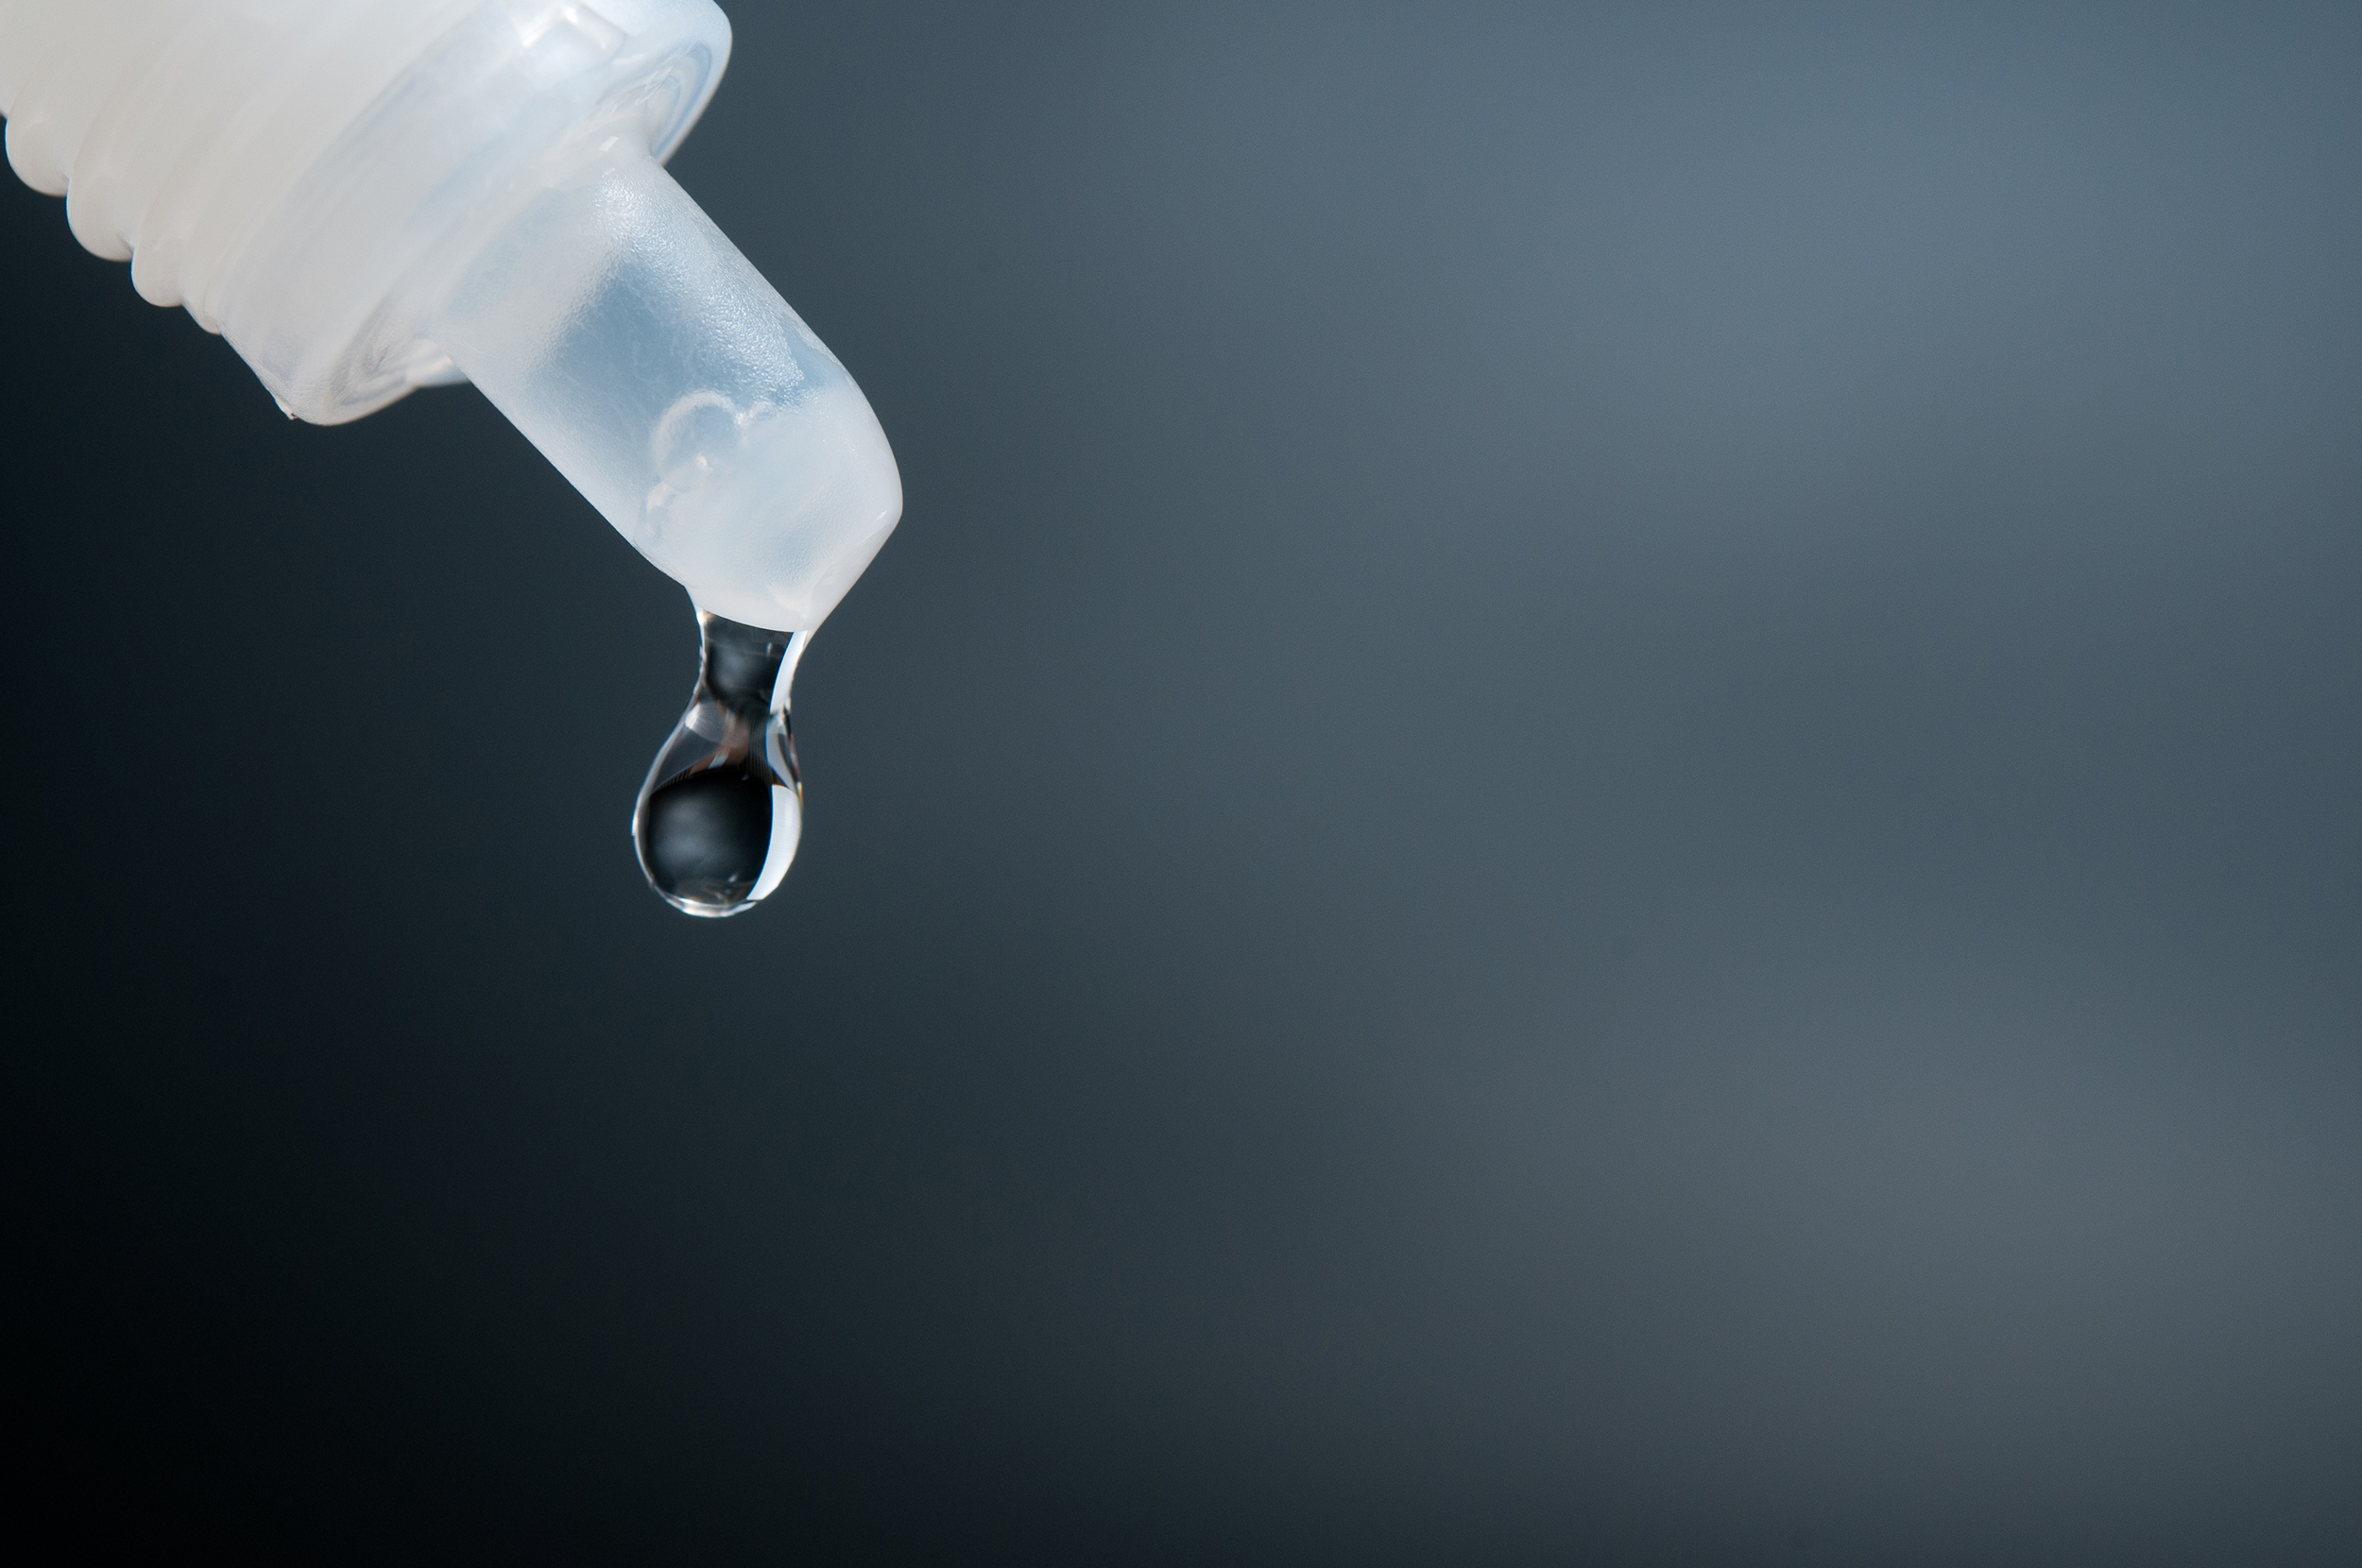 FDA warns against purchasing eye drops manufactured in 'unsanitary conditions'